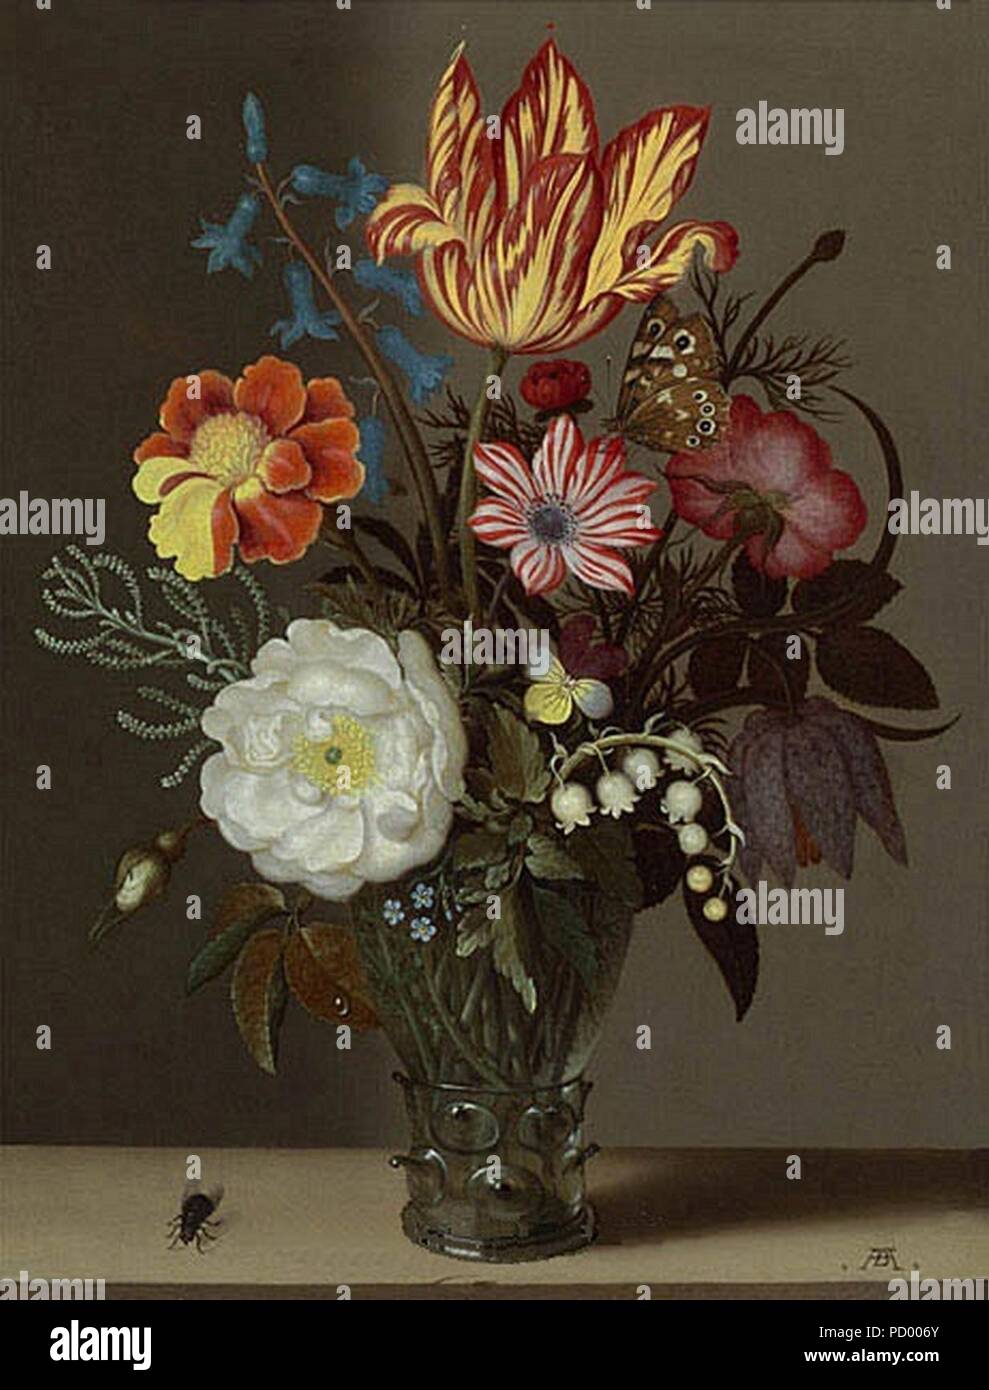 Ambrosius Bosschaert I - Flowers in a Rummer with a Tulip at the Top. Stock Photo